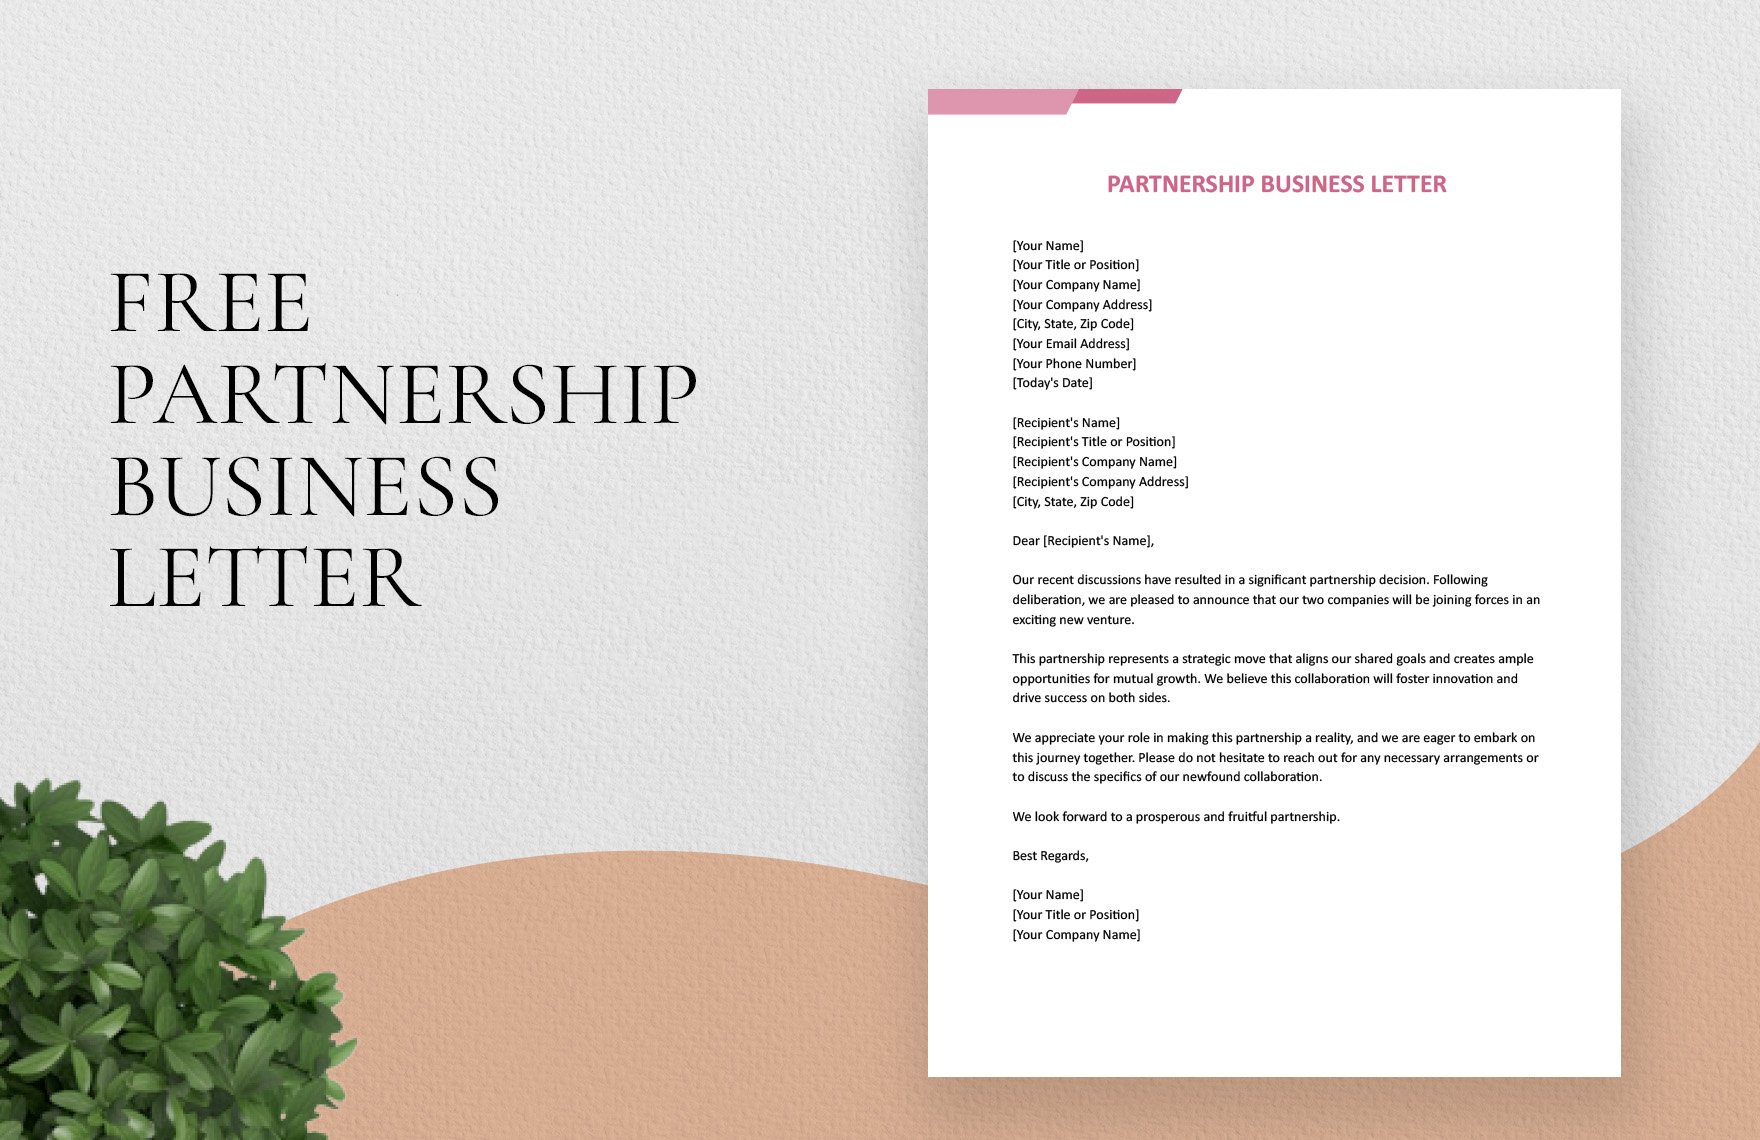 Free Partnership Business Letter in Word, Google Docs